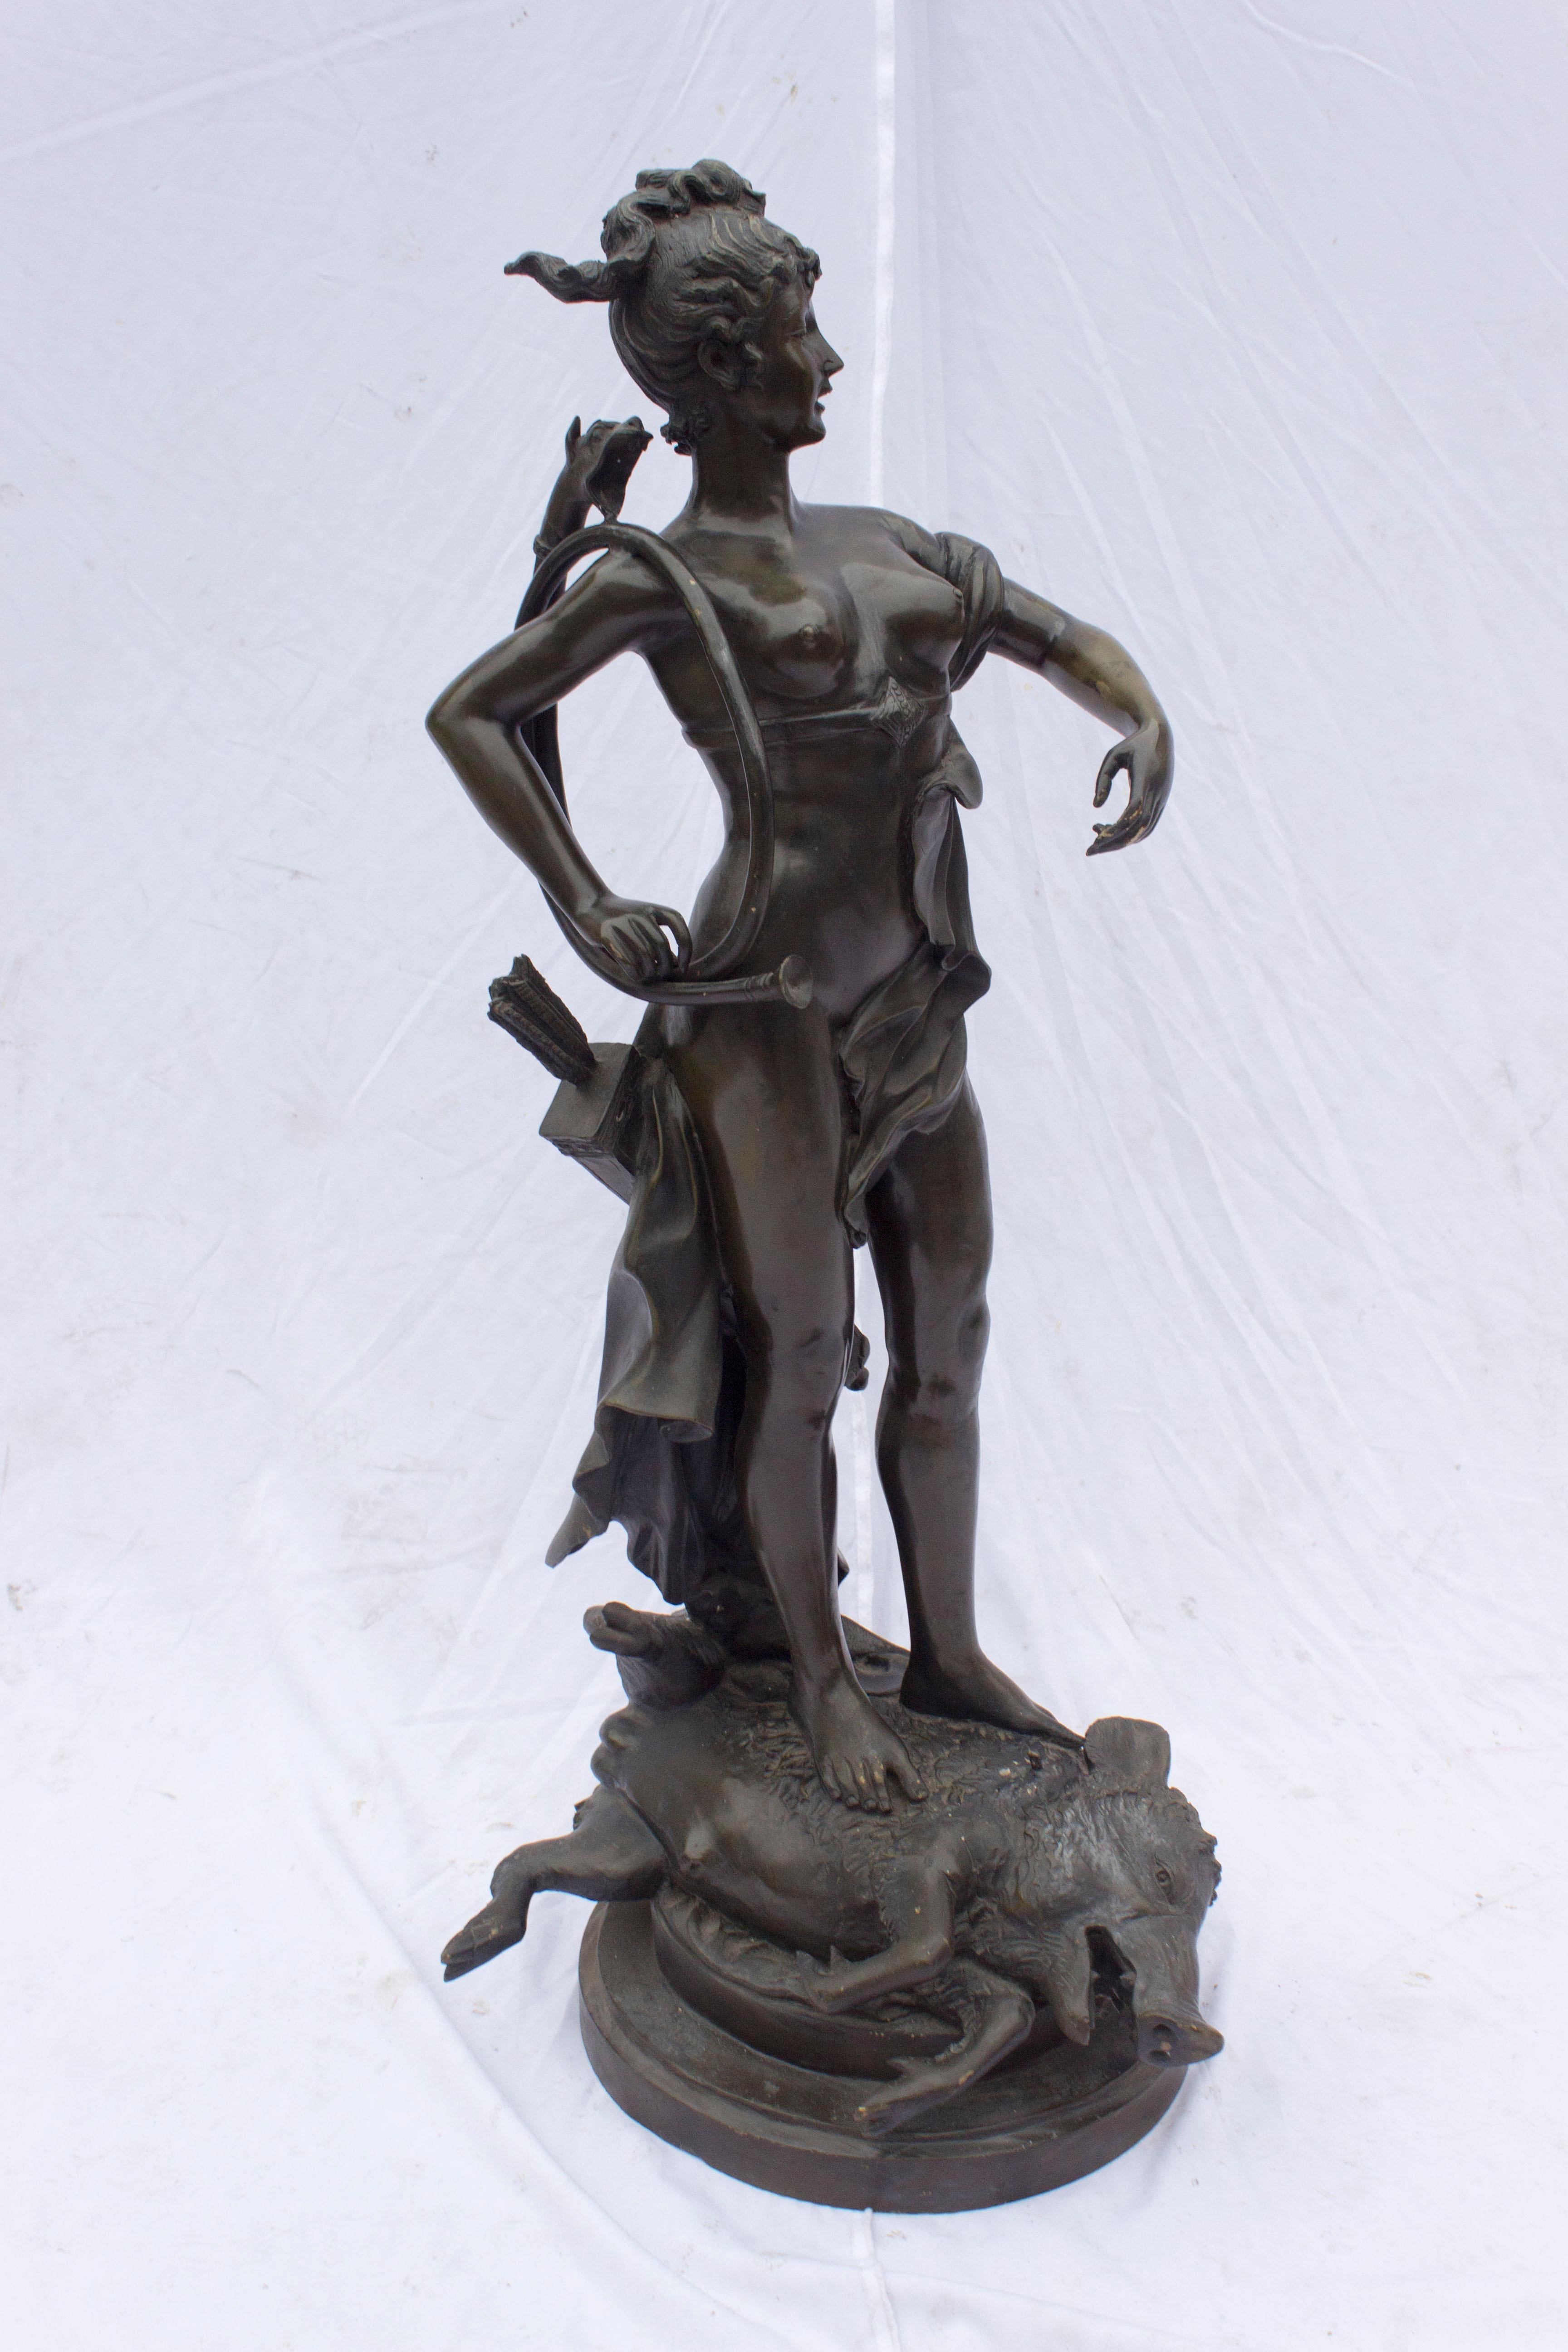 Diana Victorious is a bronze statue that stands at 120 cm tall and represents the final and crowning achievement of Carrier-Belleuse's (French, 1824–1887) career as an artist. He dedicated his final years to perfecting the sculpture and showcased it